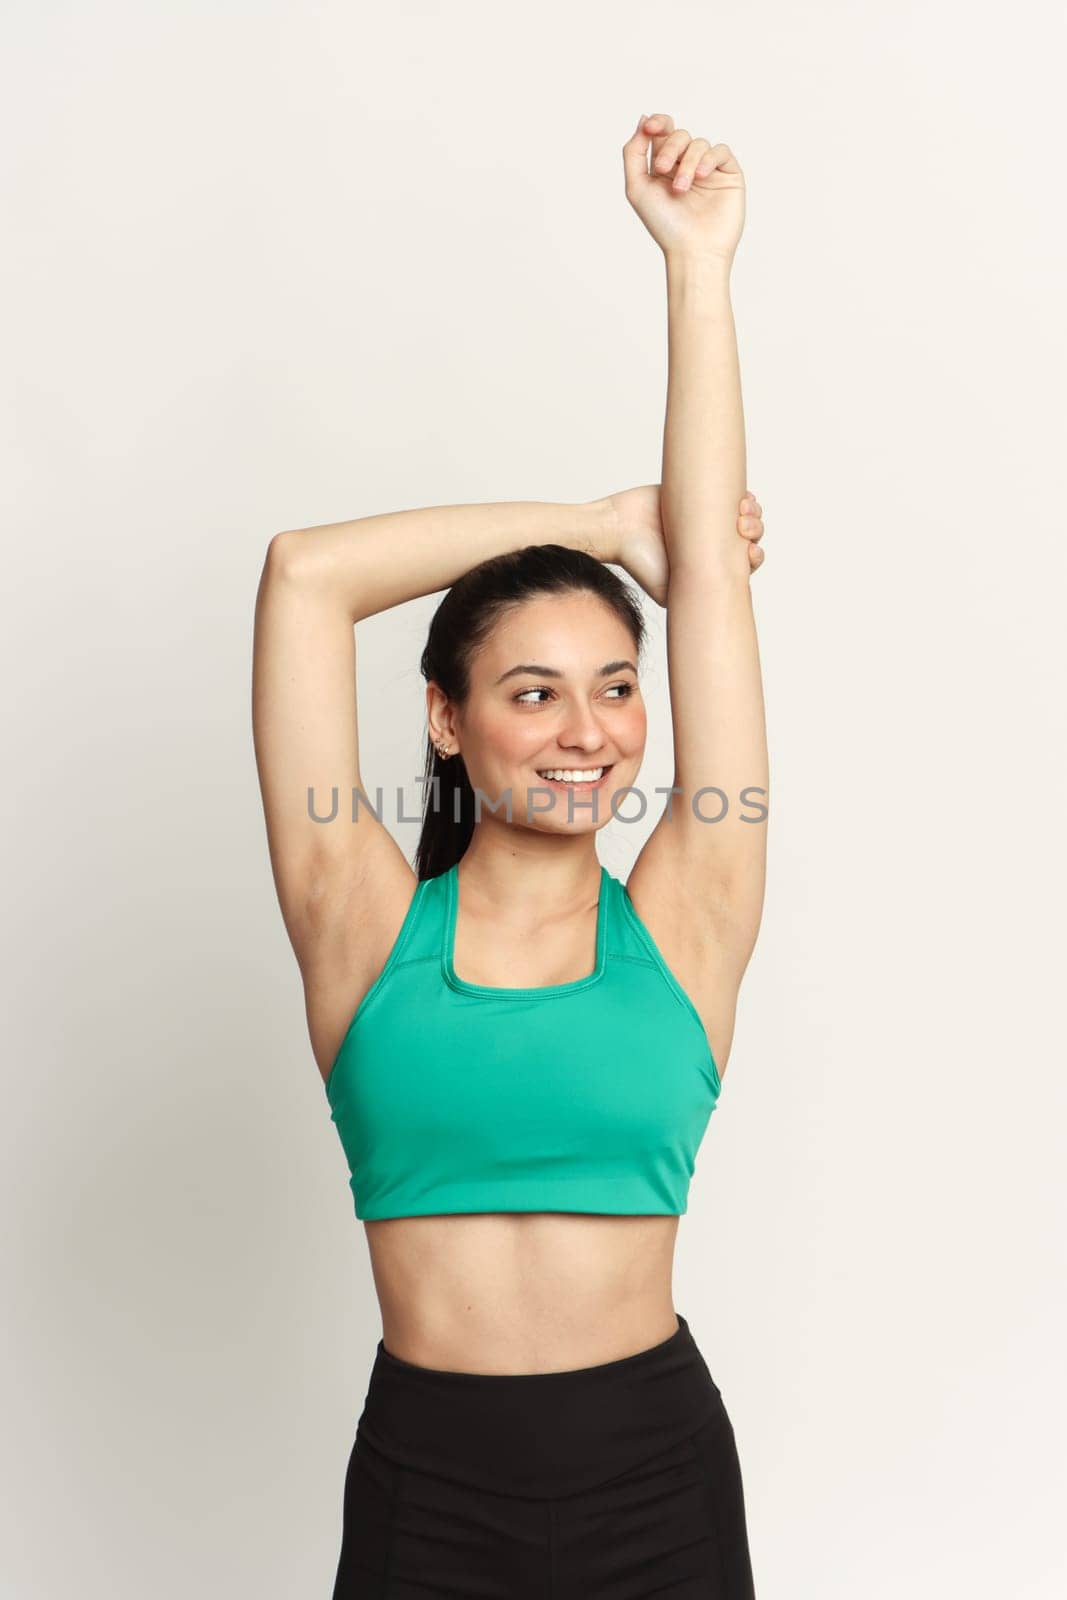 A young woman dresses in sports clothes, raising arms over her head, wears a green top tank, smiling, against a white backdrop in studio.